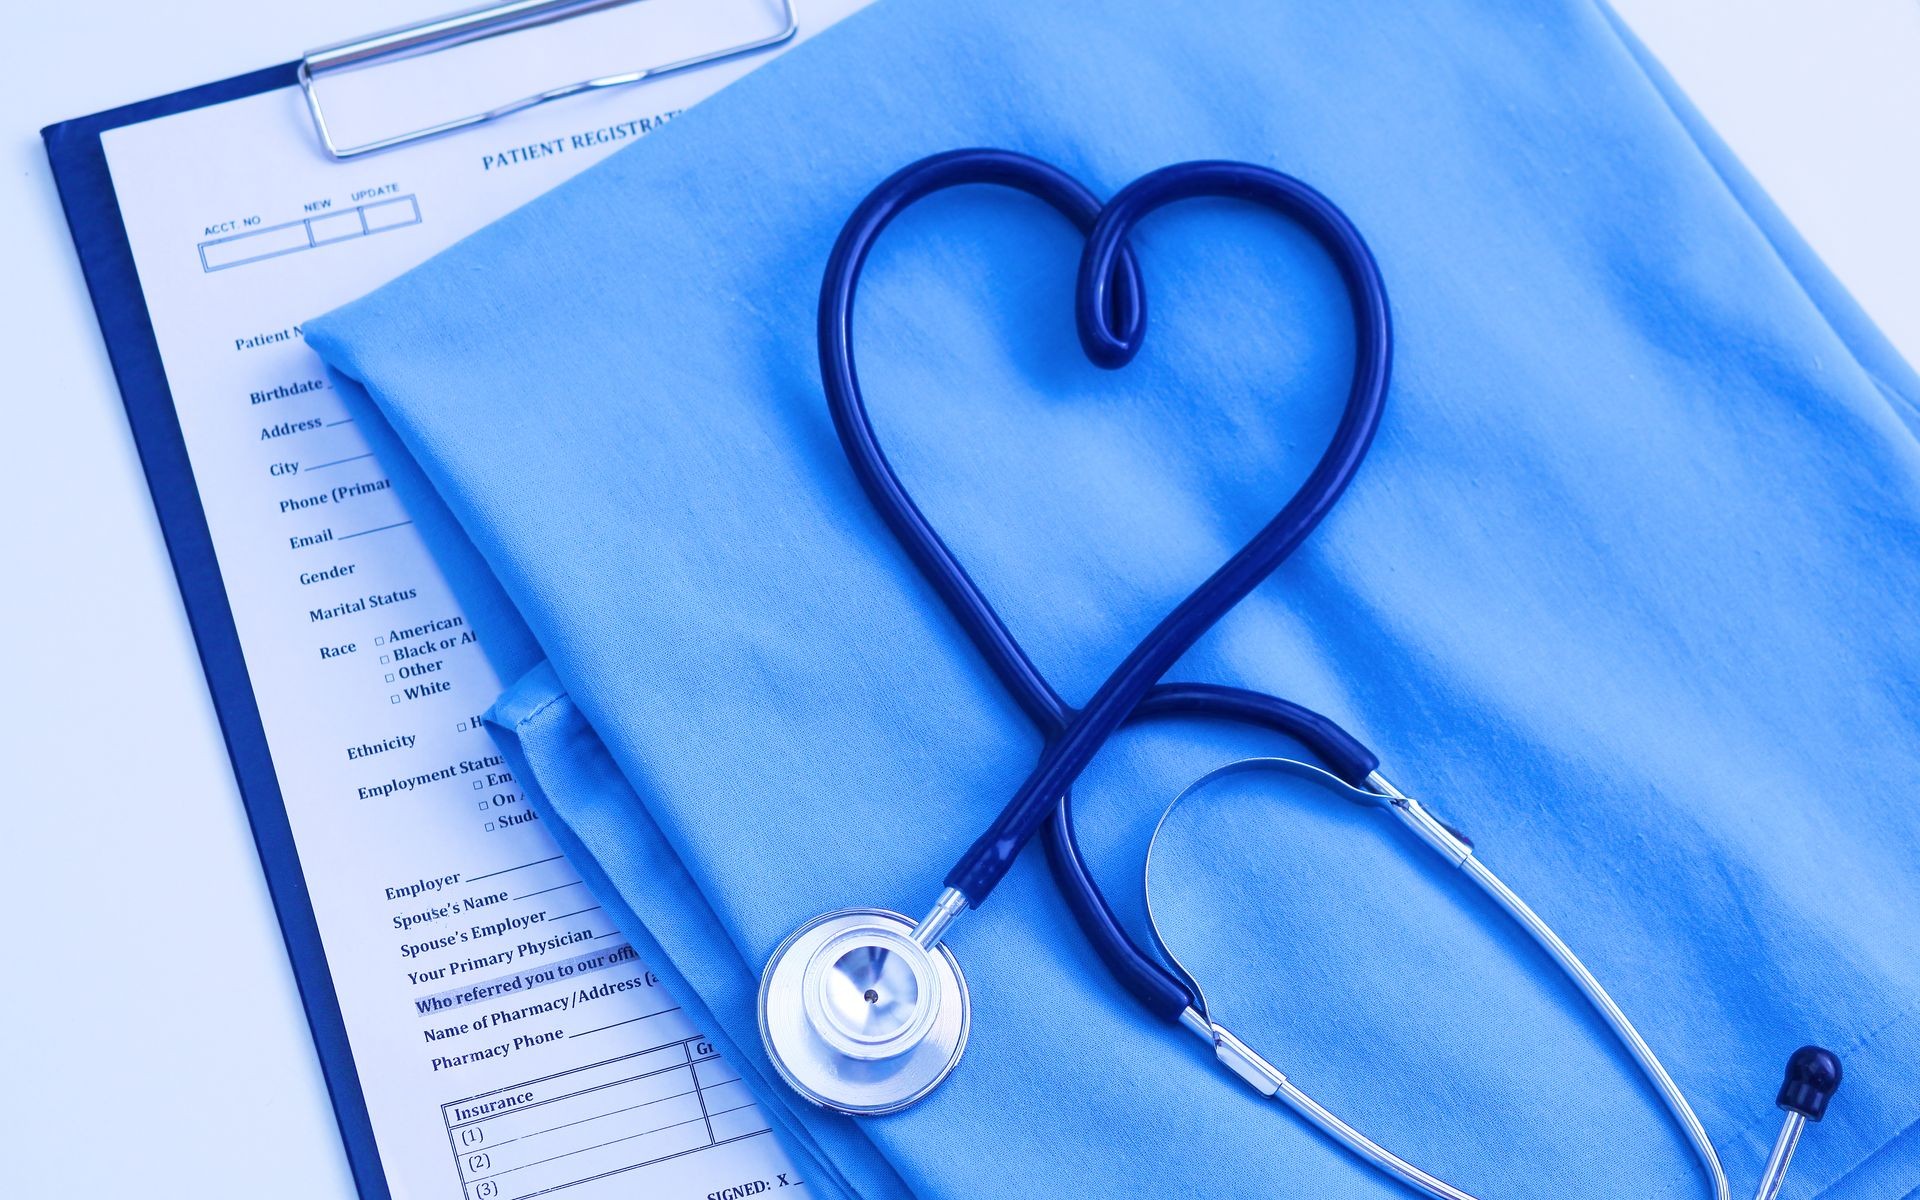 Medical stethoscope twisted in heart shape lying on patient medical history list and blue doctor uniform closeup.